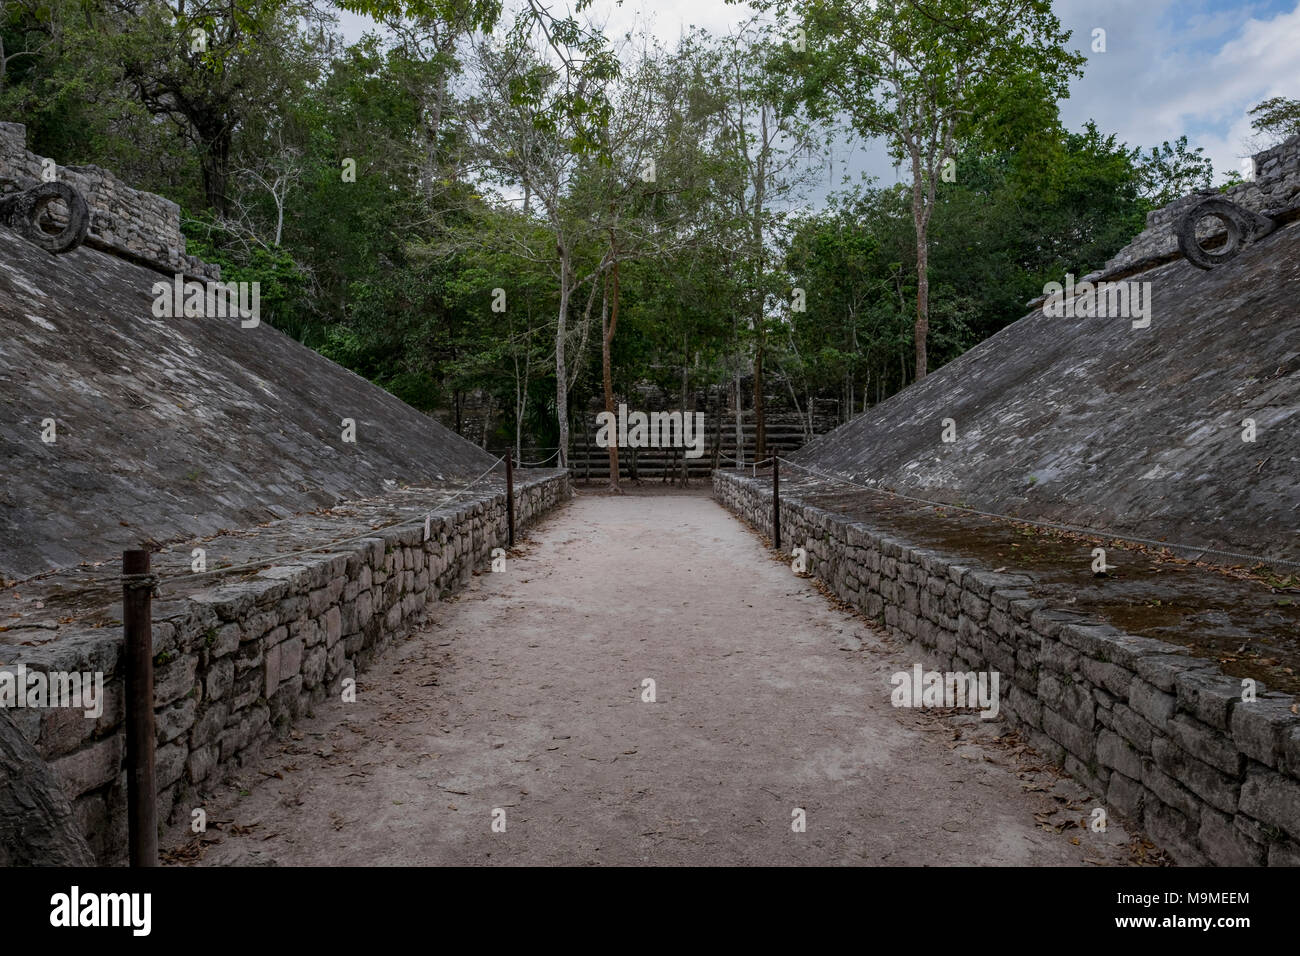 Ancient ball court ruins from the Mayan archeological site in Coba, Mexico  where ceremonial rituals were performed. Stock Photo